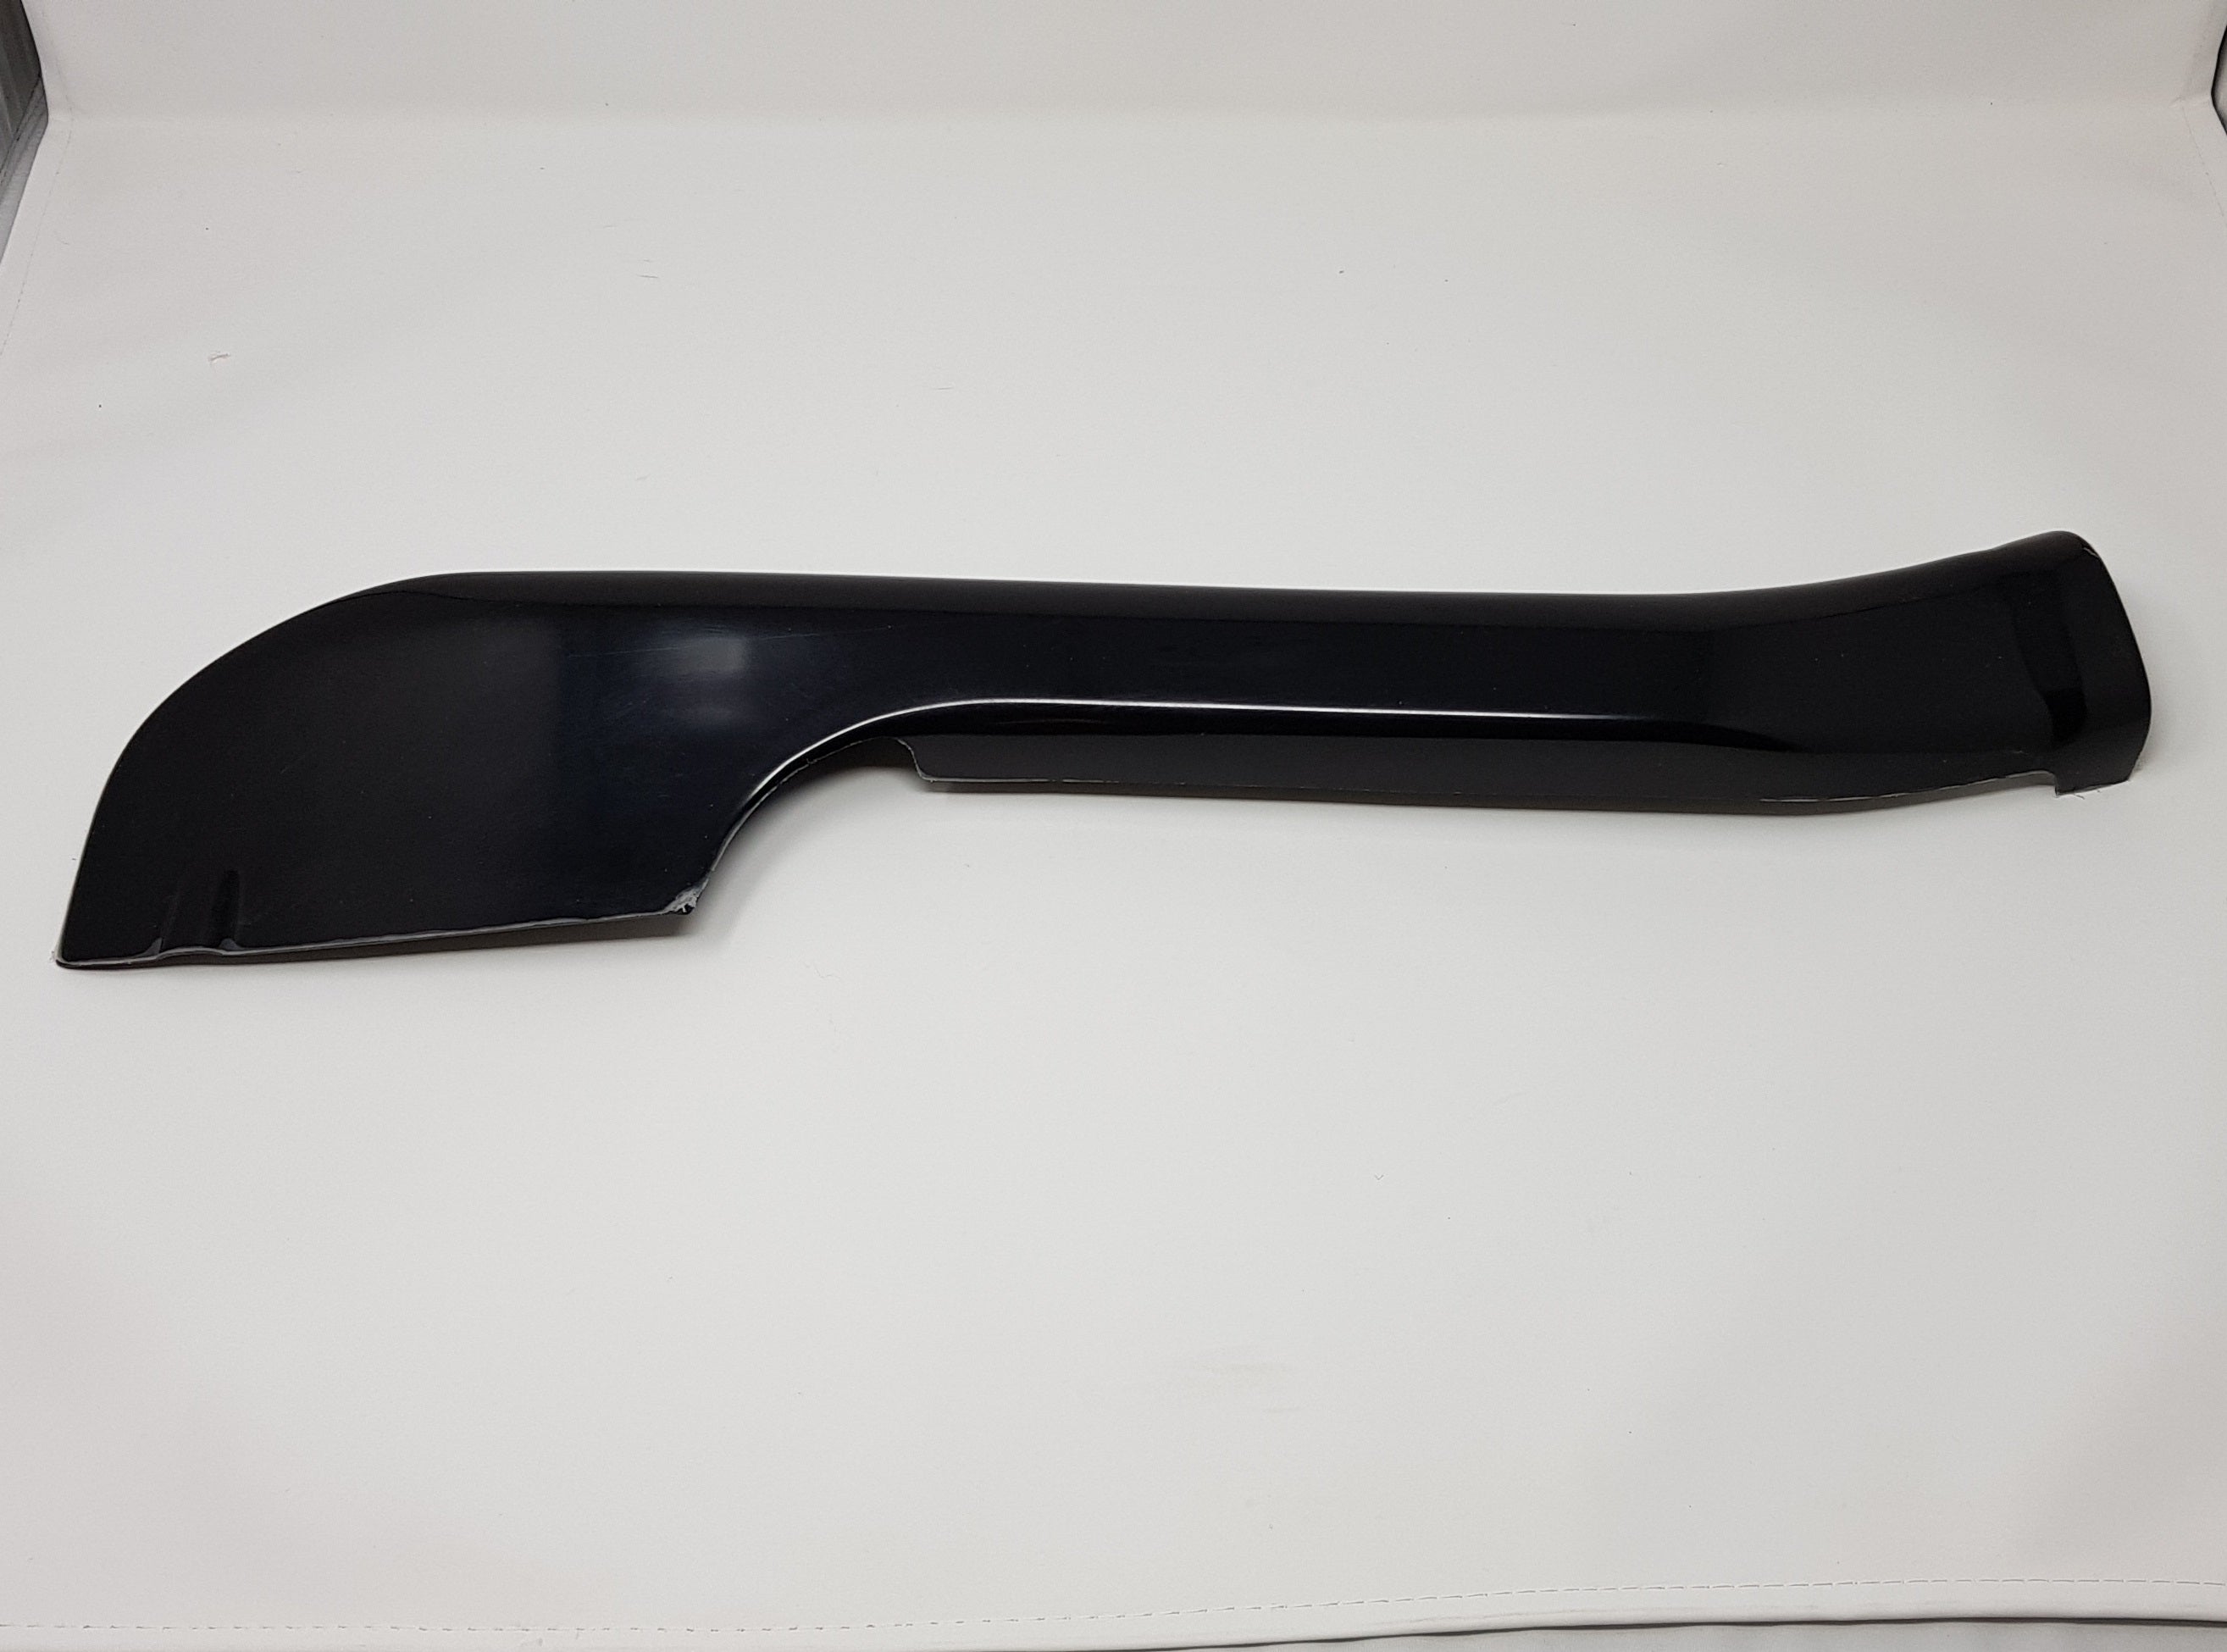 Proform Air Intake Cover - Mk4/4.5 Ford Focus (Plastic Finishes)